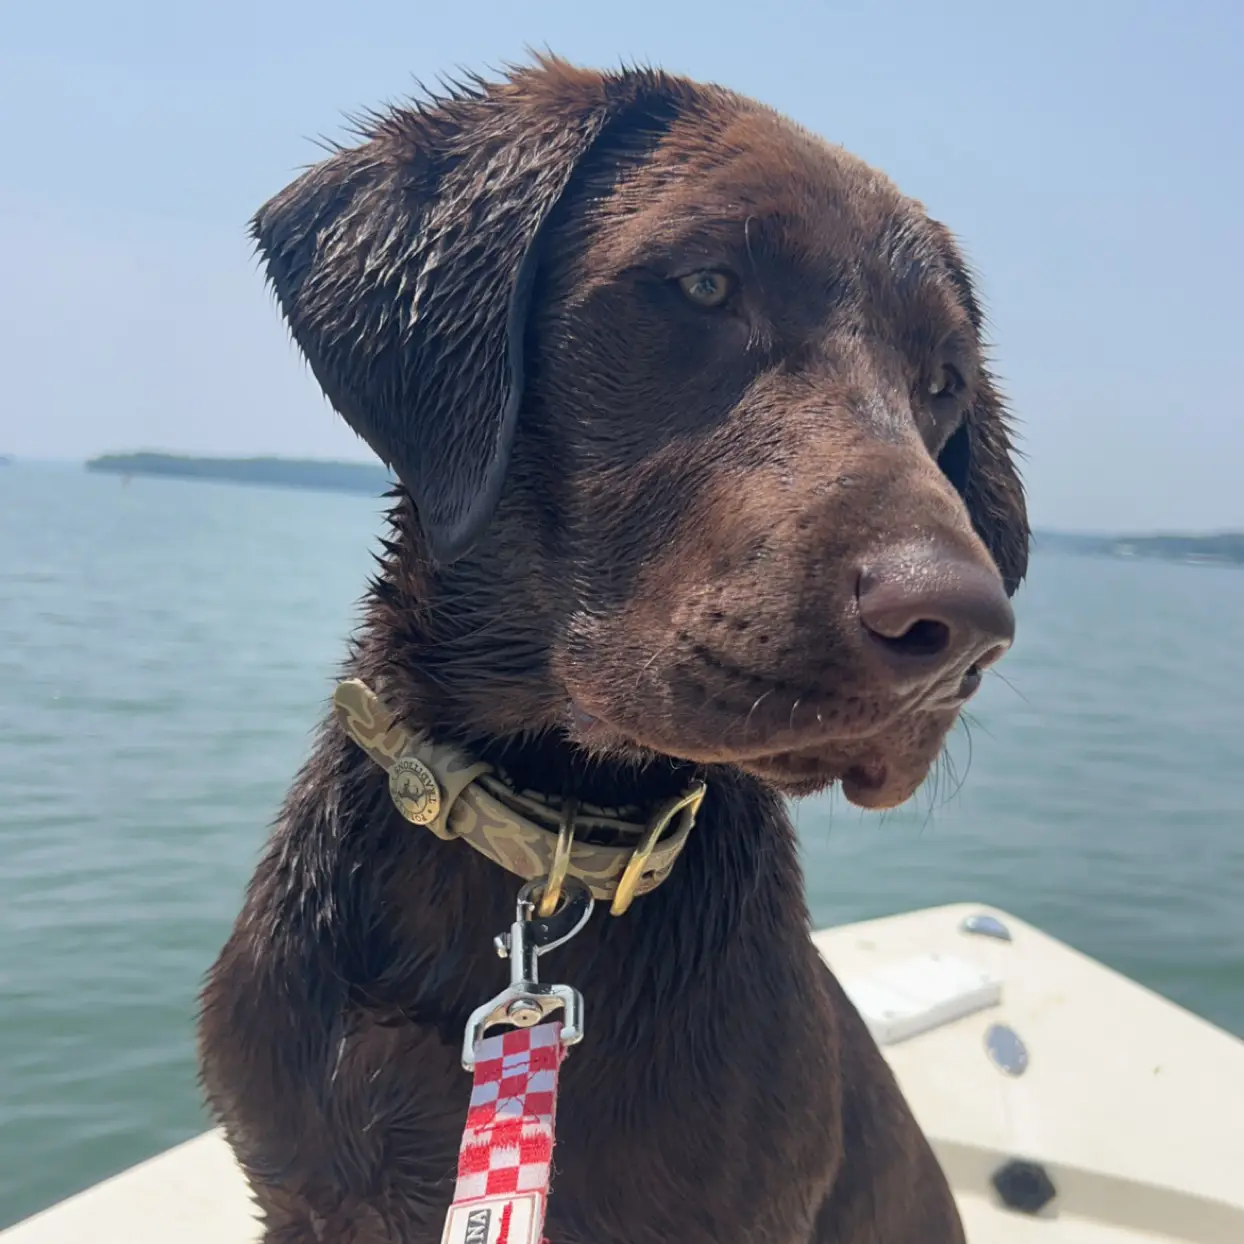 Goose the chocolate lab on Lake Hartwell after a swim with wet fur and red checkered leash plus camo collar